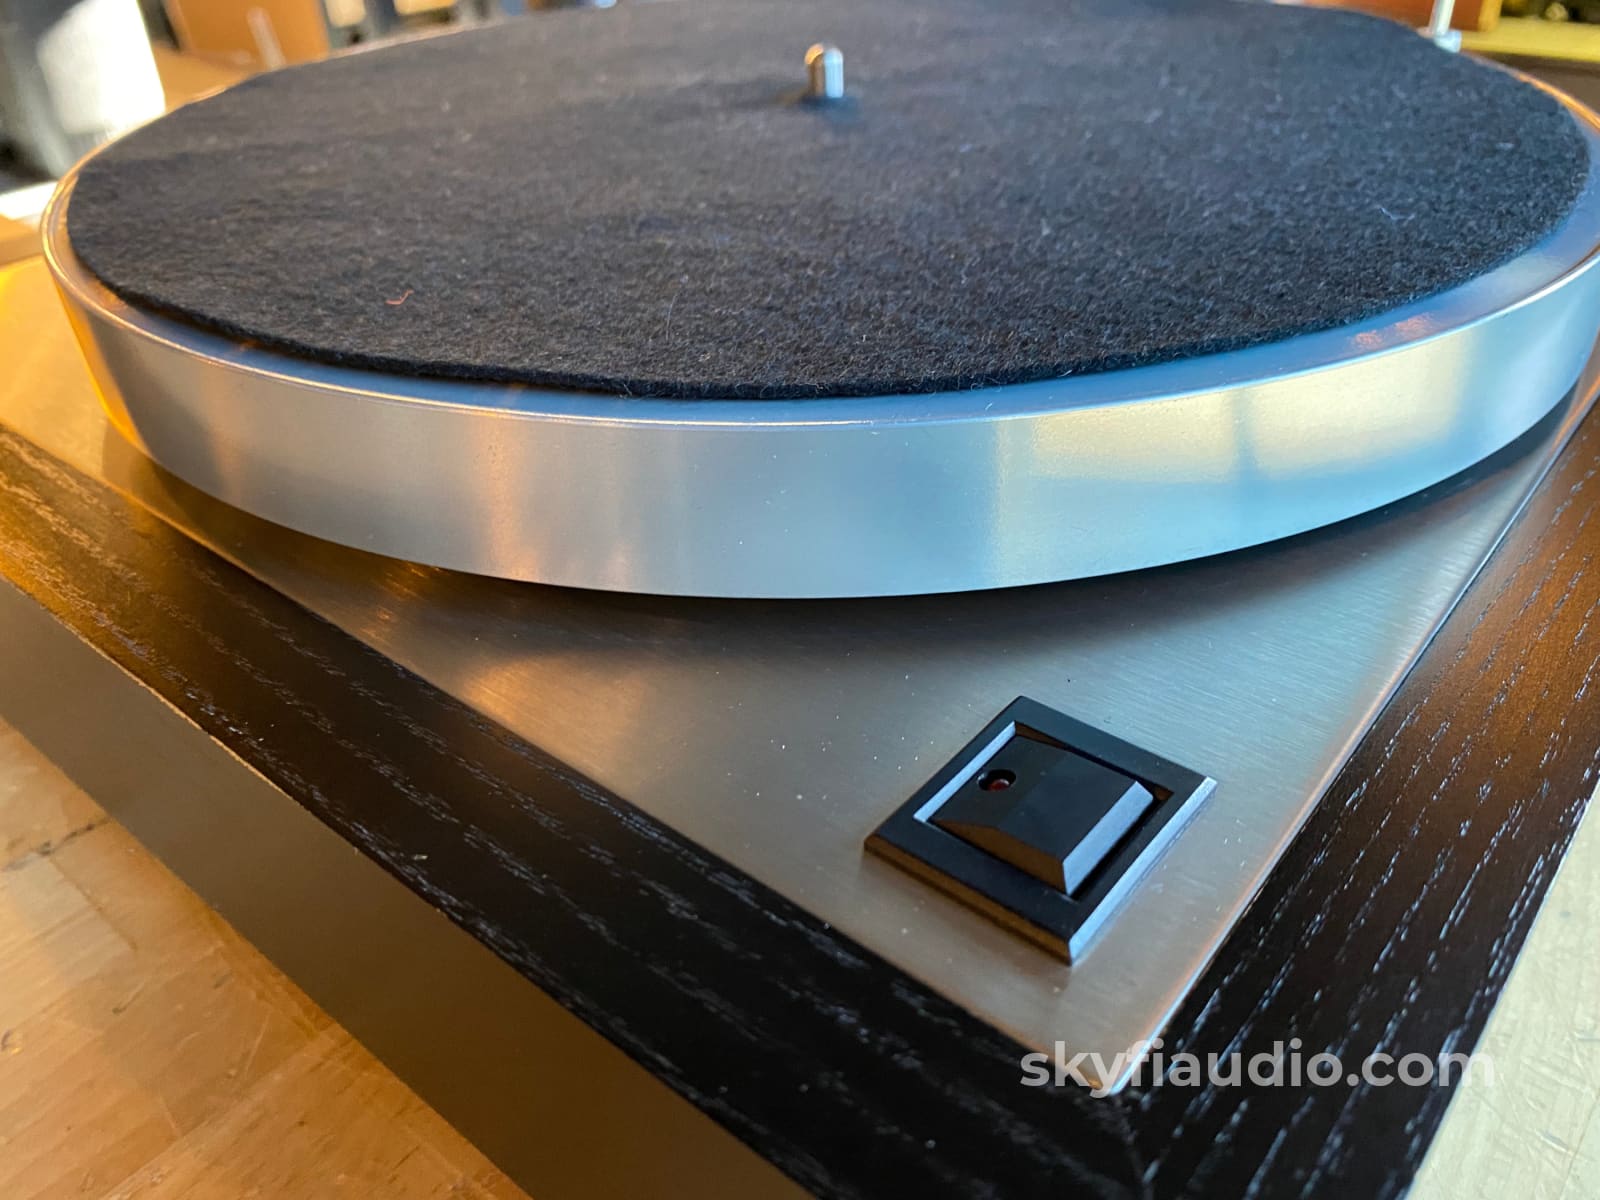 Linn Lp12 Turntable - With Ittok Arm And New Sumiko Songbird